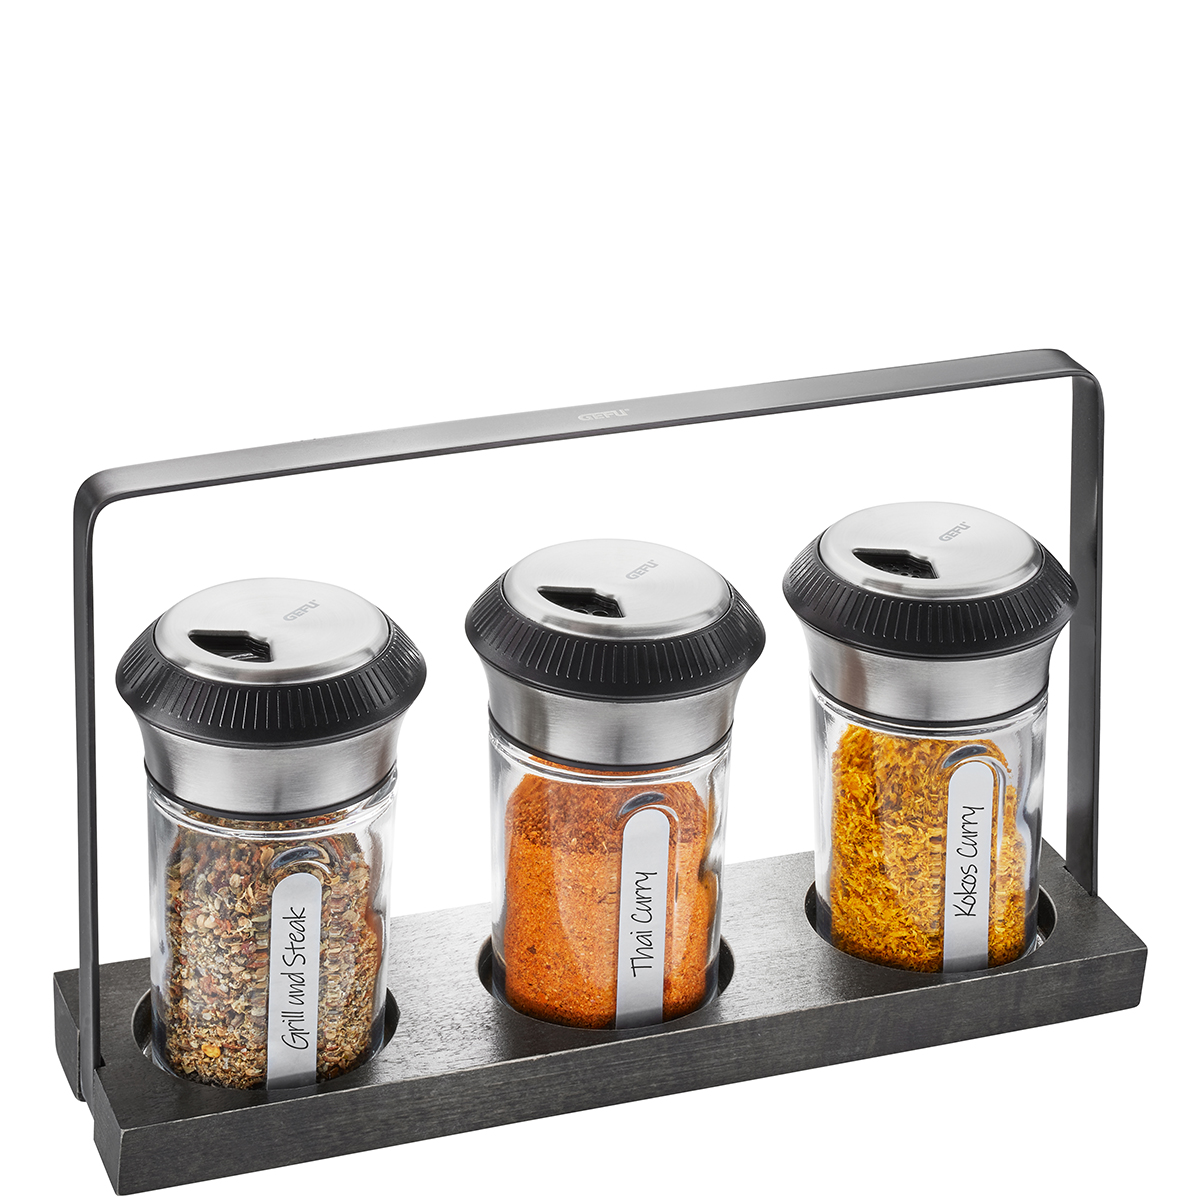 Spice and herb shaker set X-PLOSION®